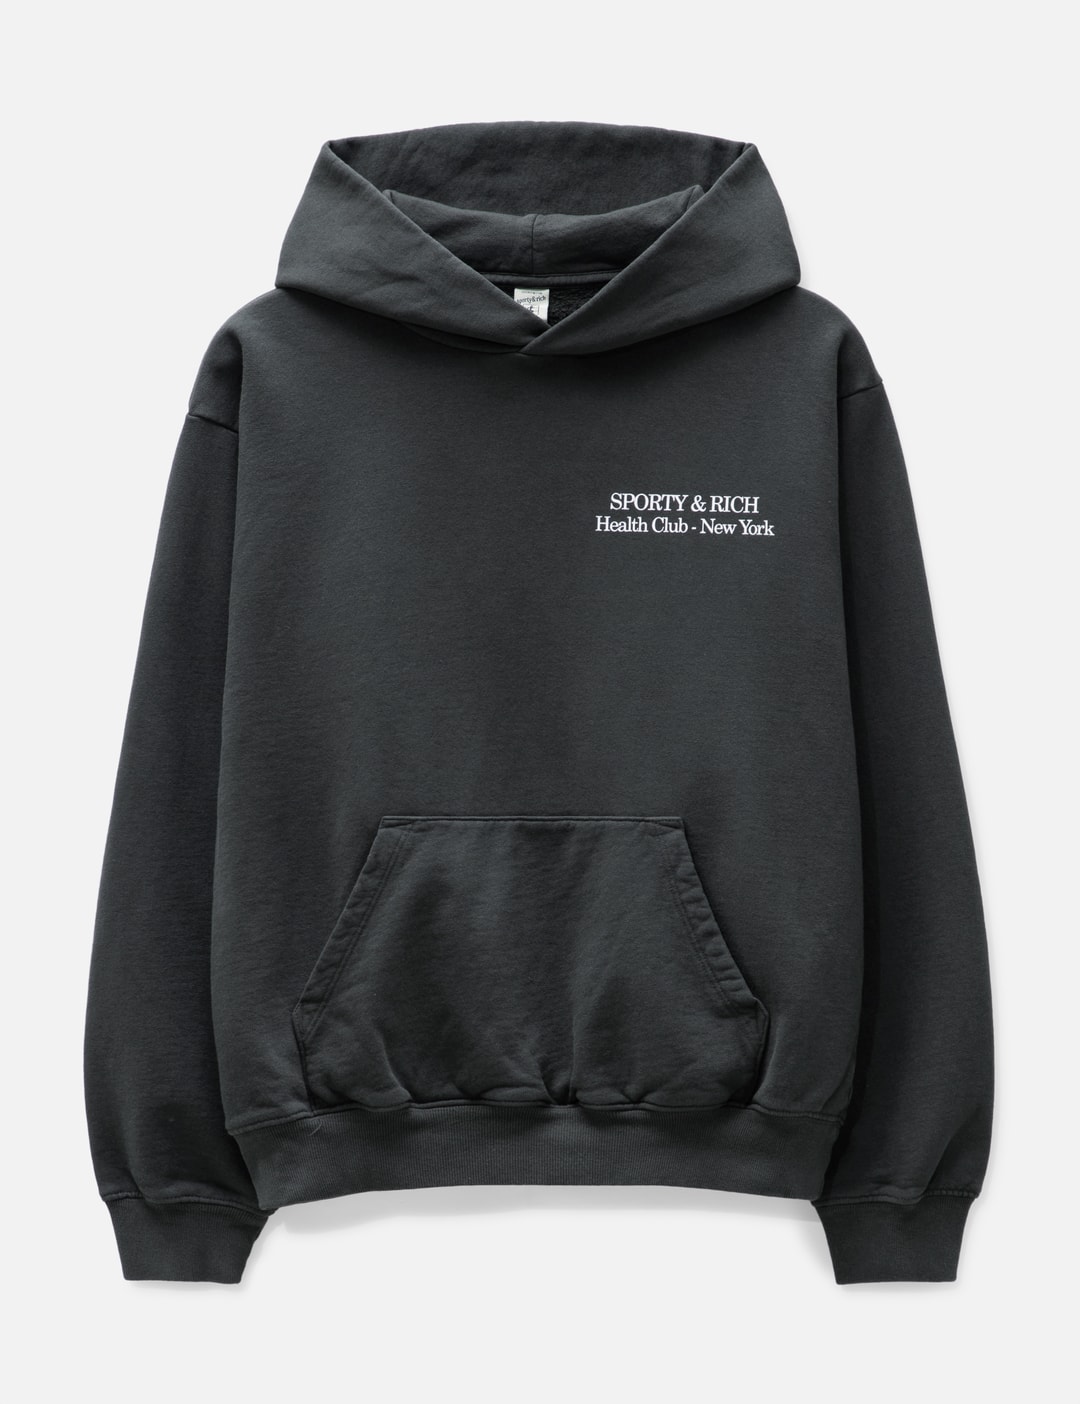 Sporty & Rich - New Drink More Water Hoodie | HBX - Globally Curated ...